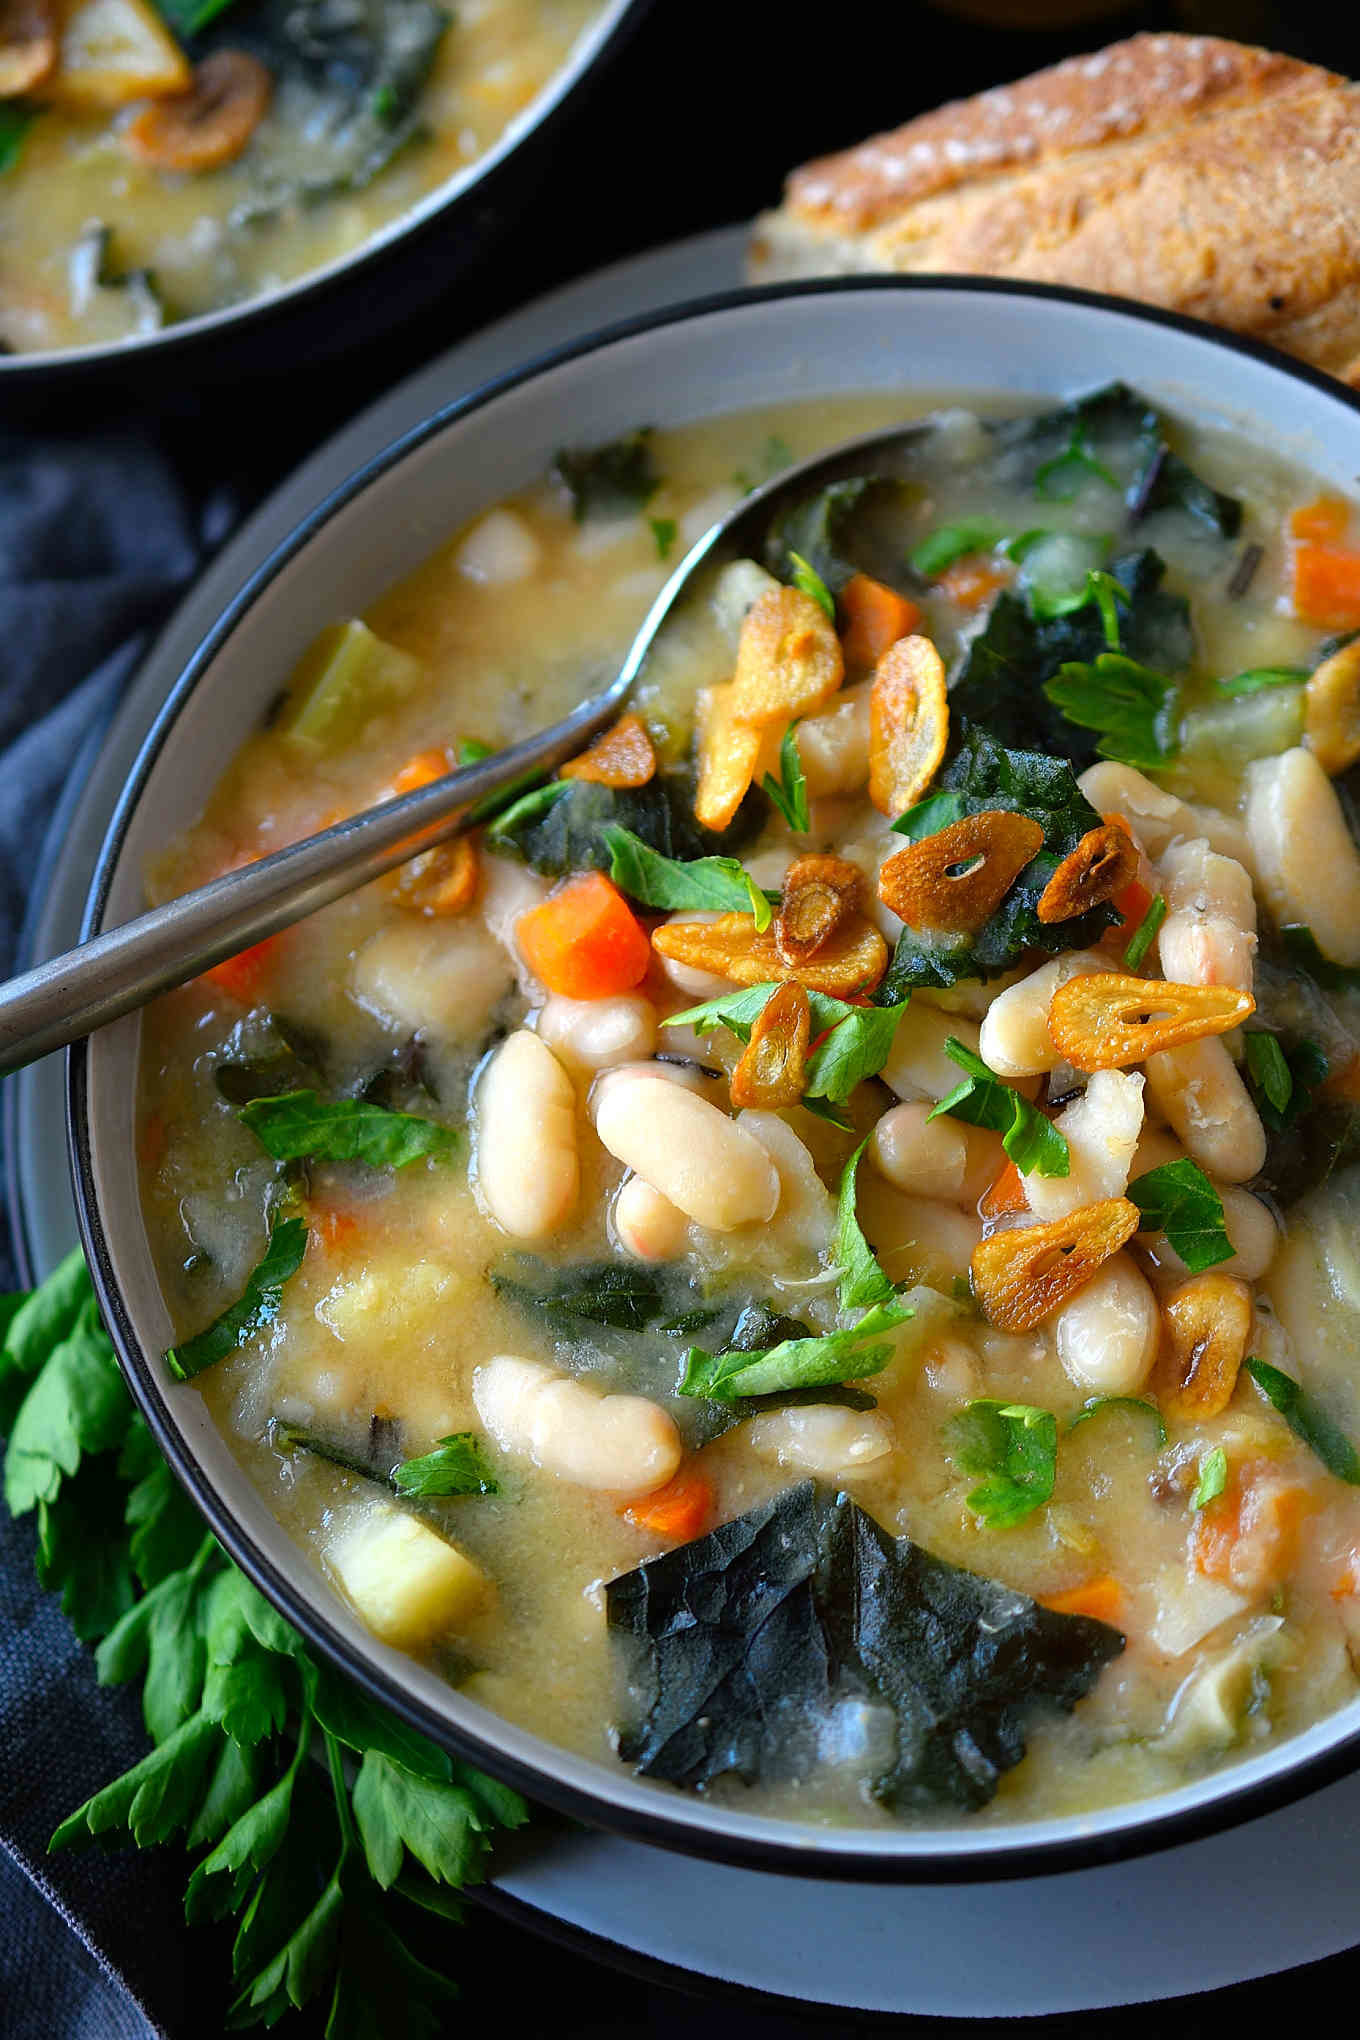 30 Cozy, Homemade Soup Recipes You Can Make In 30 Minutes